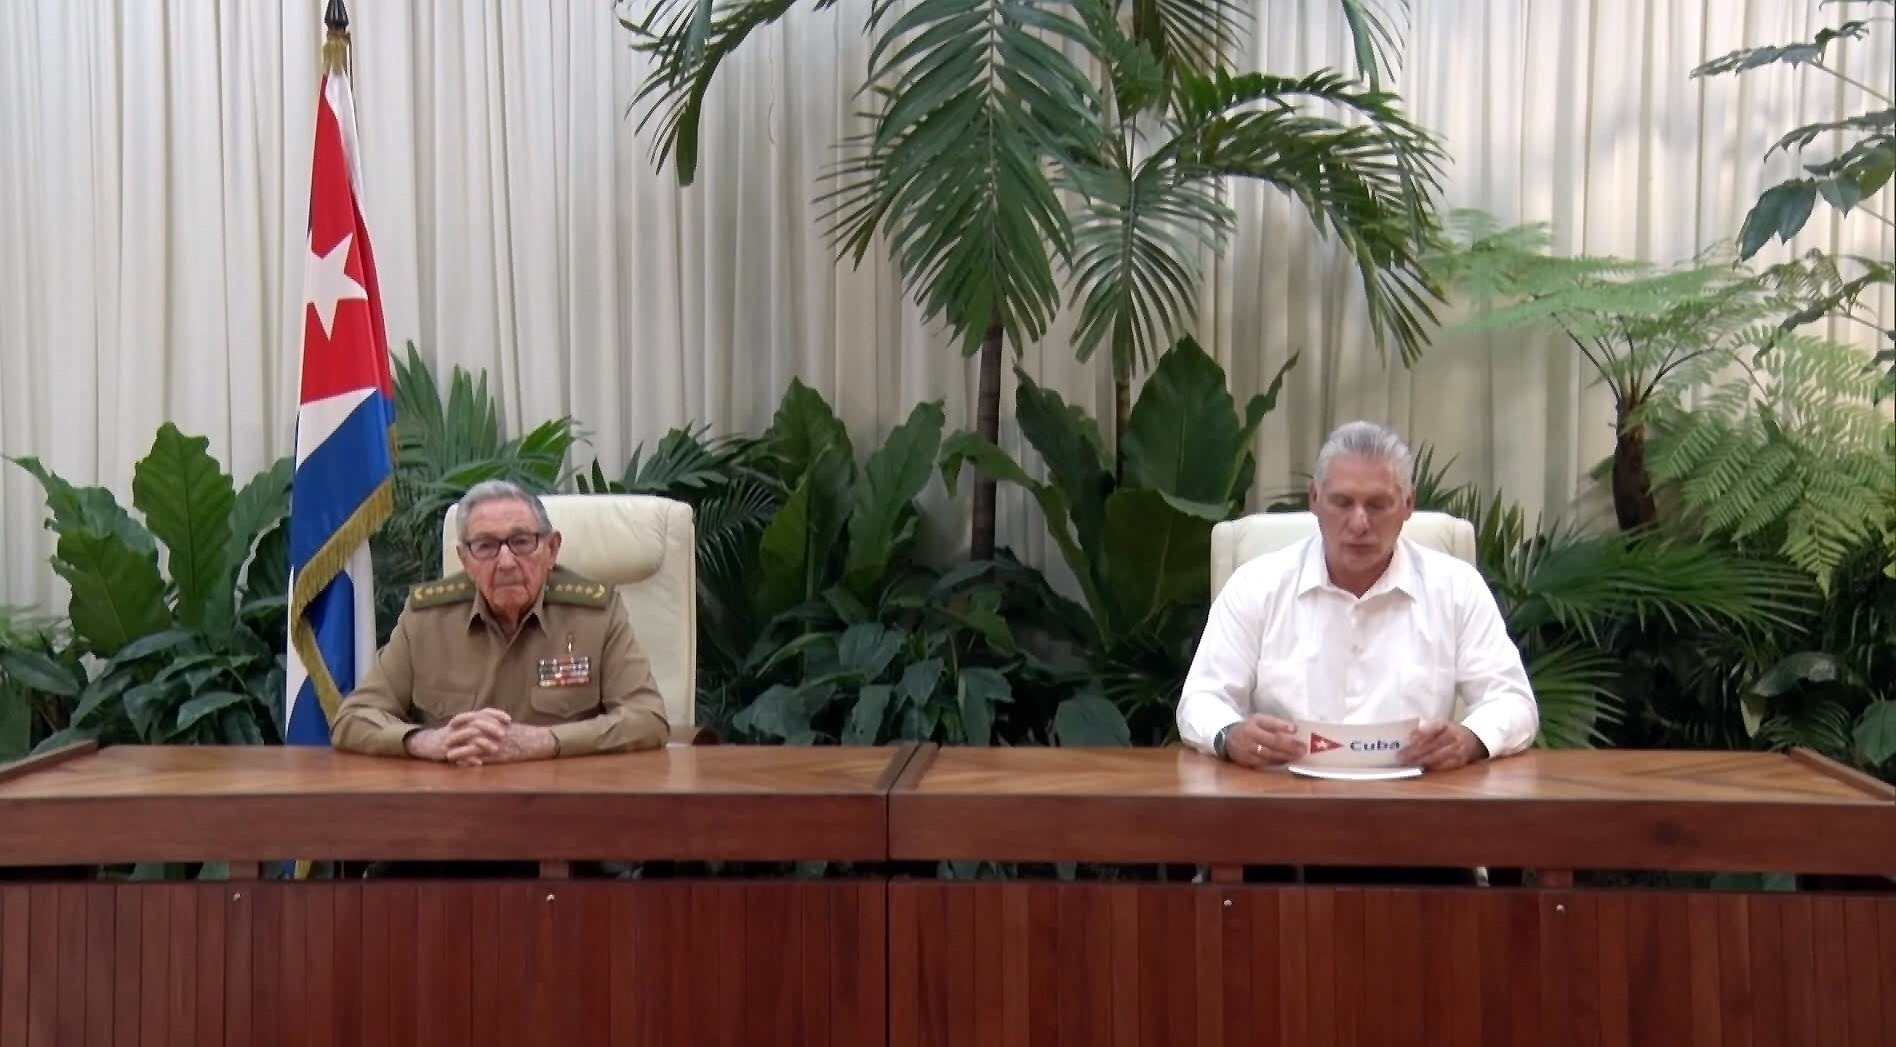 Archive image of Miguel Diaz-Canel, leader of the Cuban regime, and Raúl Castro, former leader of the Communist Party of Cuba, during an announcement in Havana (EFE)